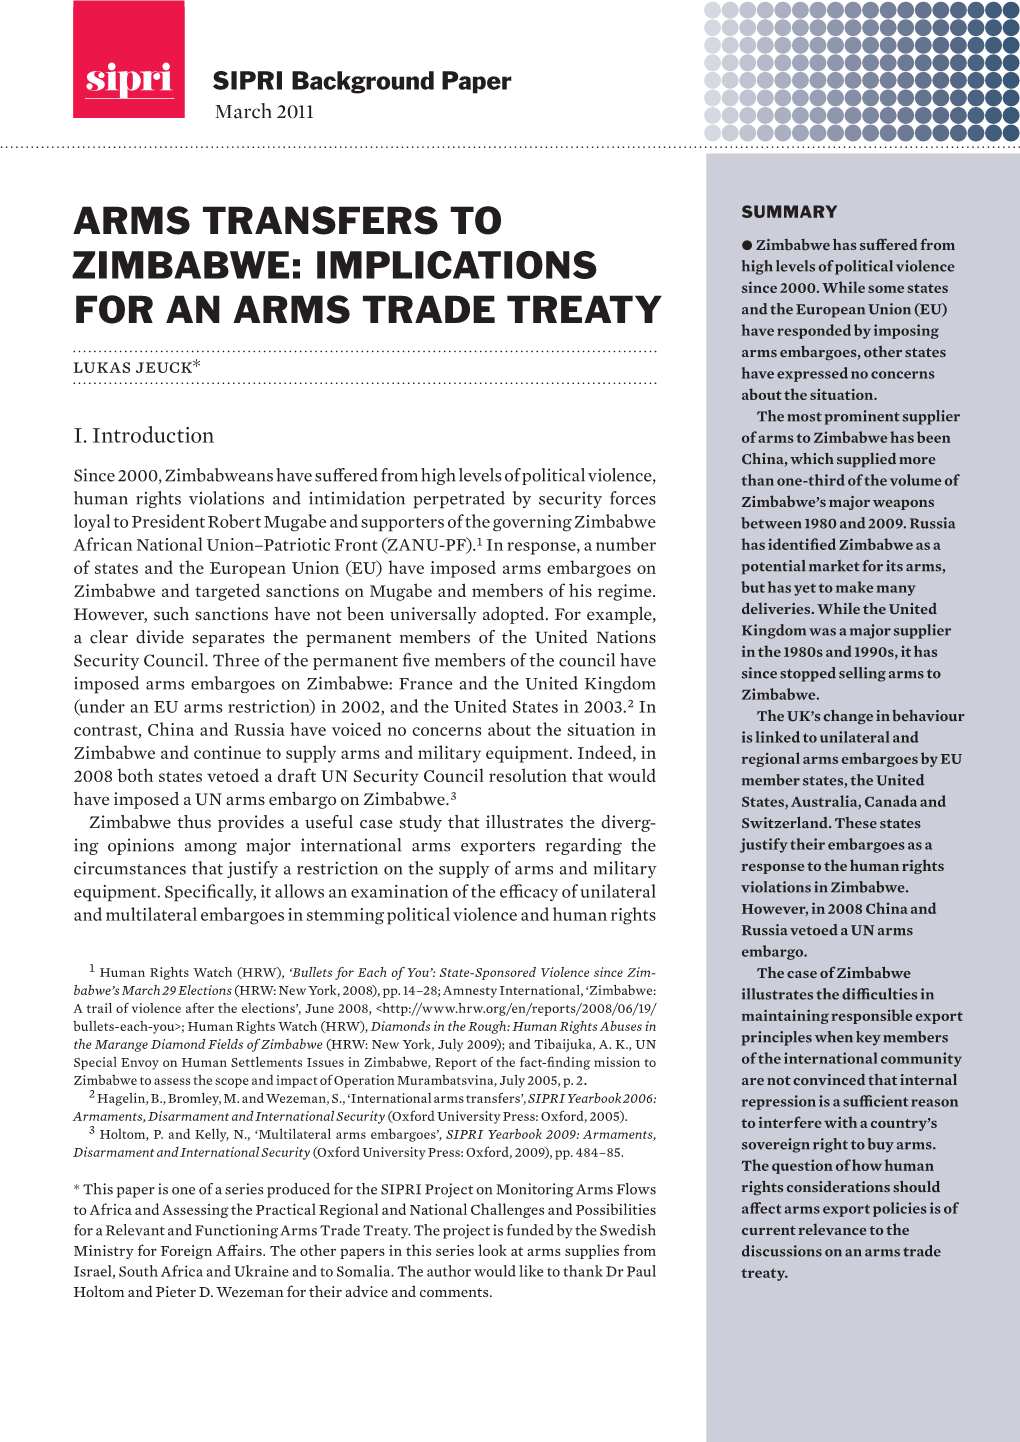 Arms Transfers to Zimbabwe: Implications for an Arms Trade Treaty, SIPRI Background Paper